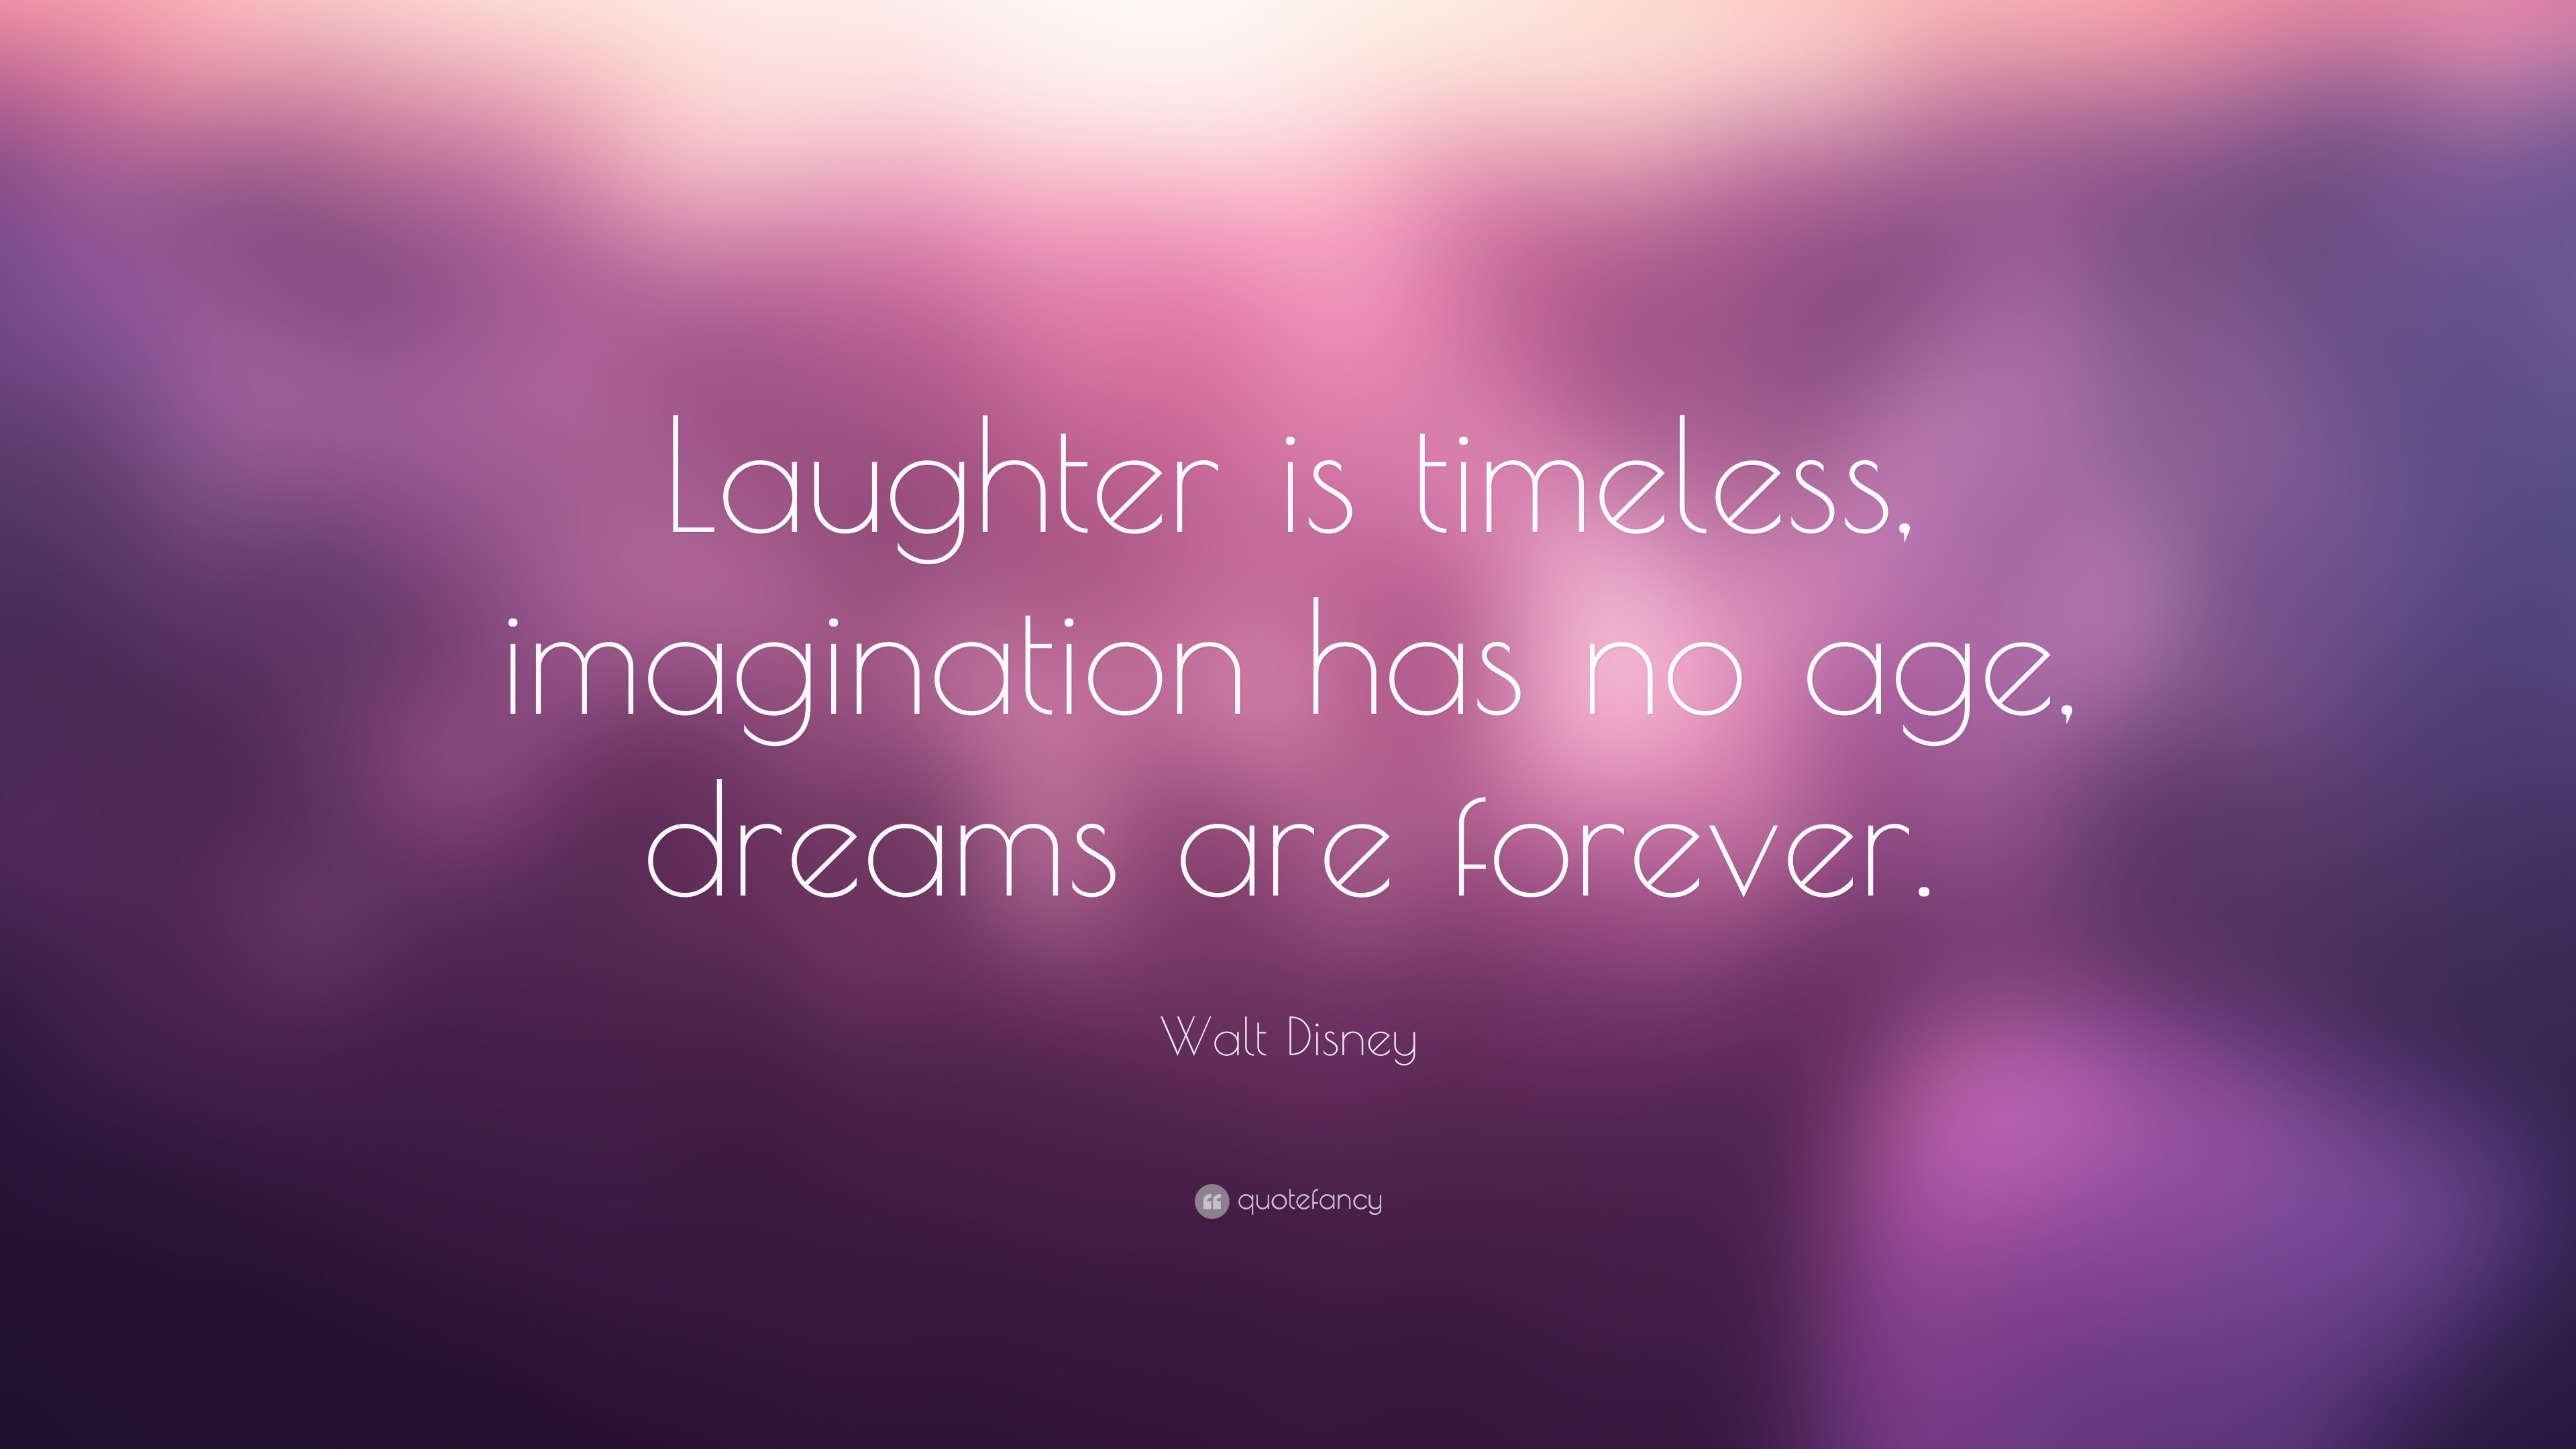 Walt Disney Quote Laughter is timeless, imagination has no age, dreams are